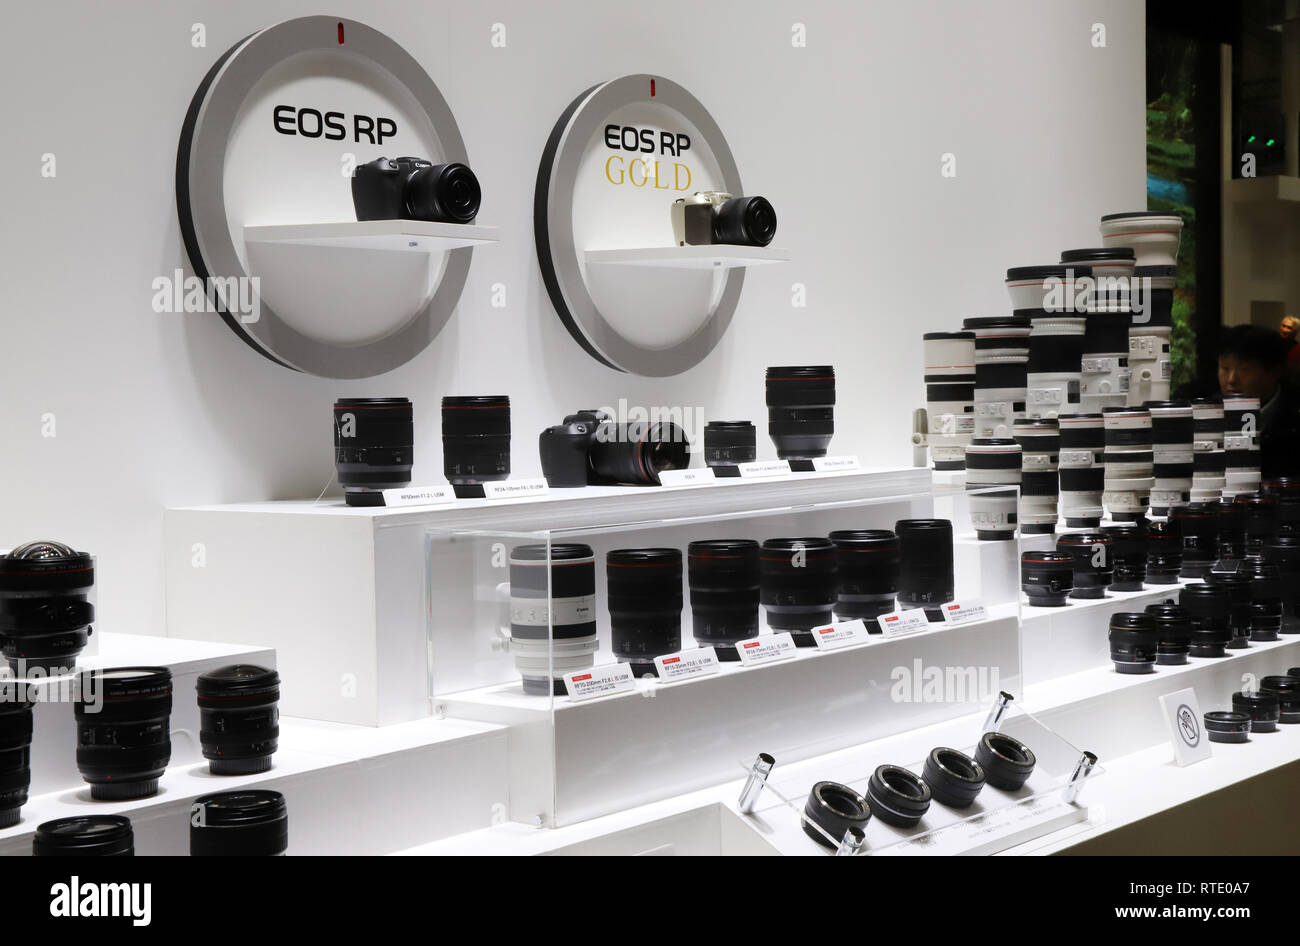 Yokohama, Japan. 28th Feb, 2019. Japanese camera maker Canon displays new mirrorless camera EOS RP and its system at the 'CP ' camera and photo exhibition in Yokohama, suburban Tokyo on Thursday, February 28, 2019. Some 70,000 camera fans are expecting to visit a four-day exhibition. Credit: Yoshio Tsunoda/AFLO/Alamy Live News Stock Photo